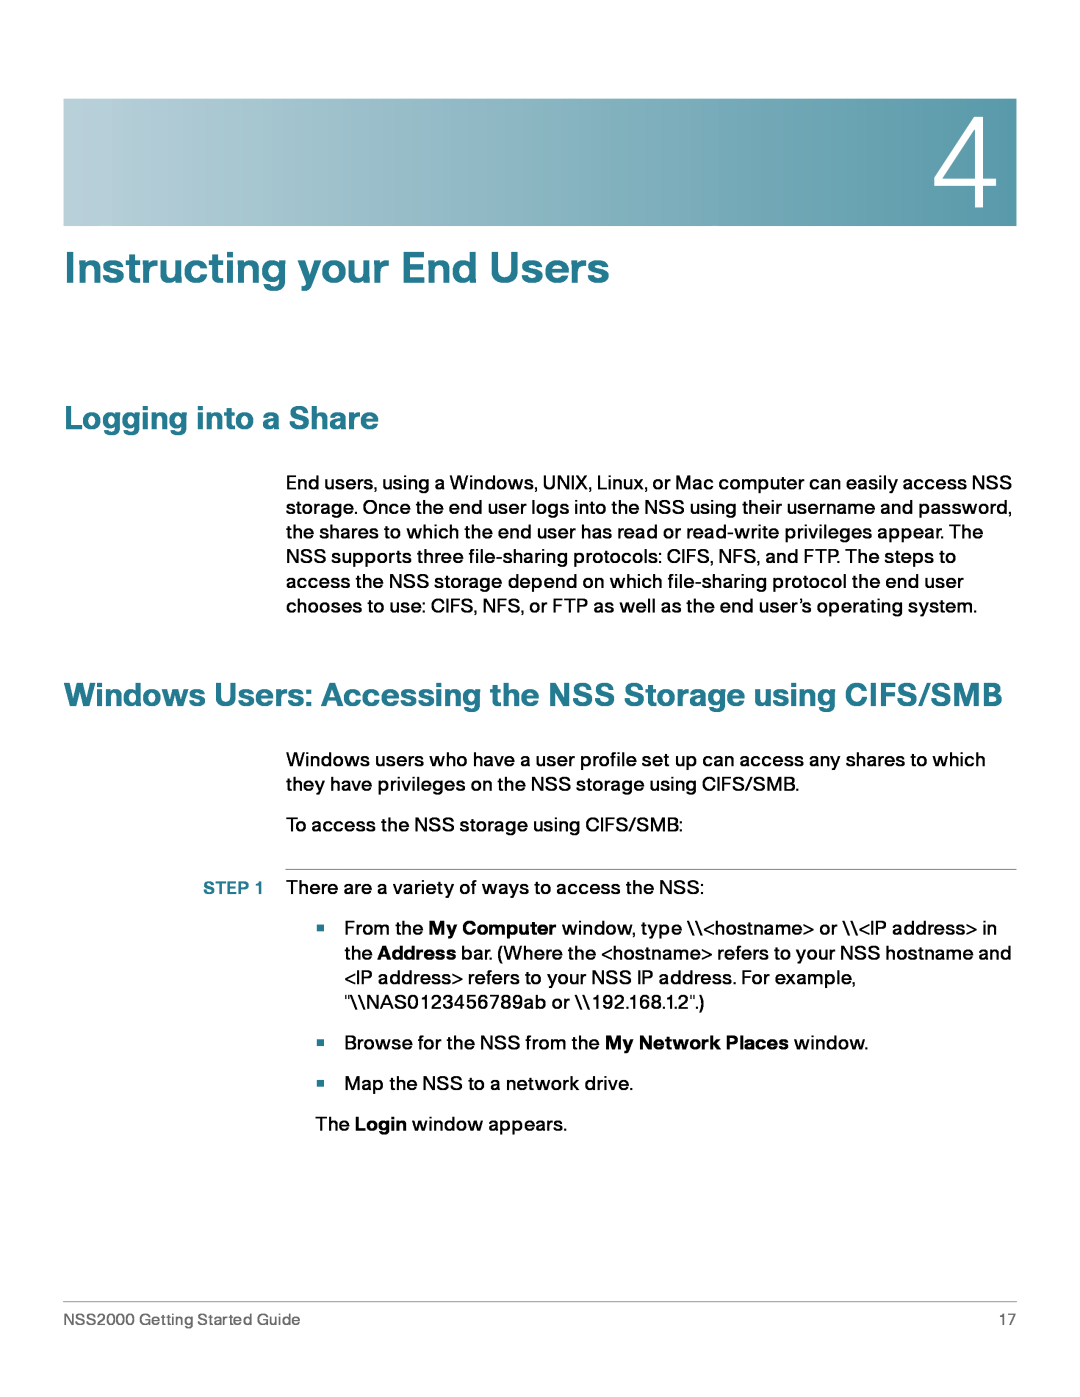 Cisco Systems NSS2000 Series manual Instructing your End Users, Logging into a Share 